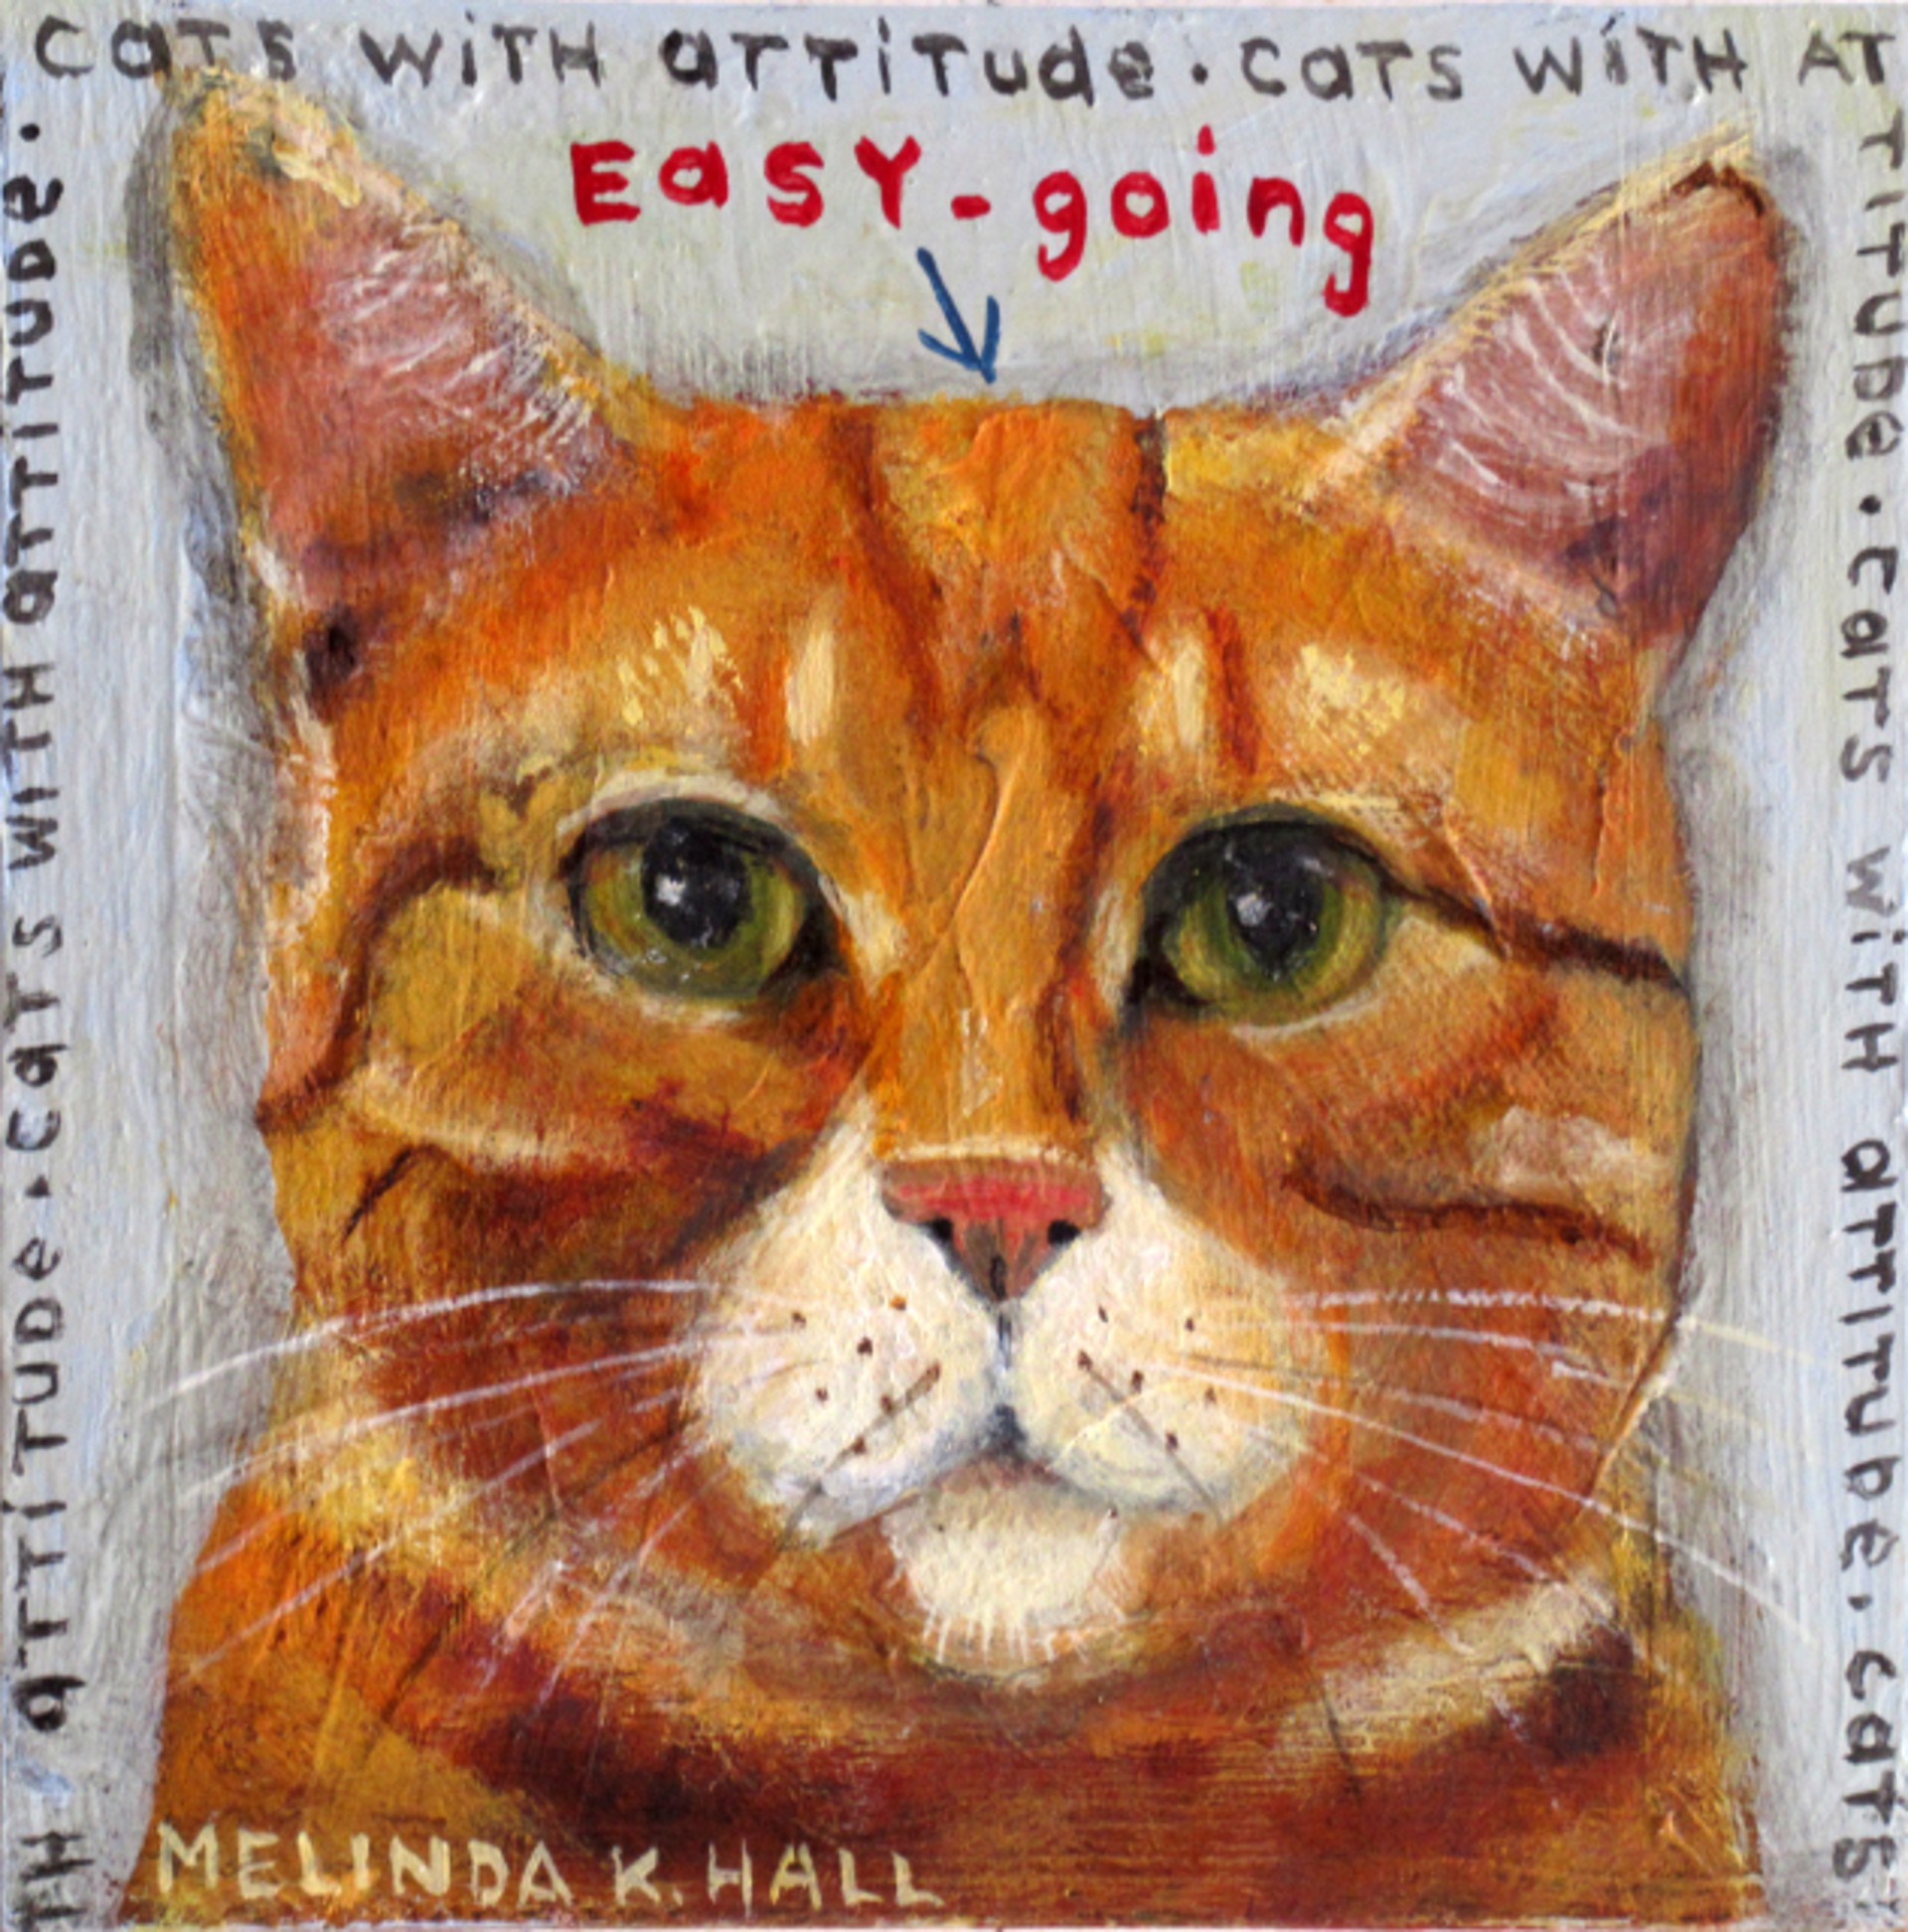 Cats with Attitude: Easy-Going by Melinda K. Hall